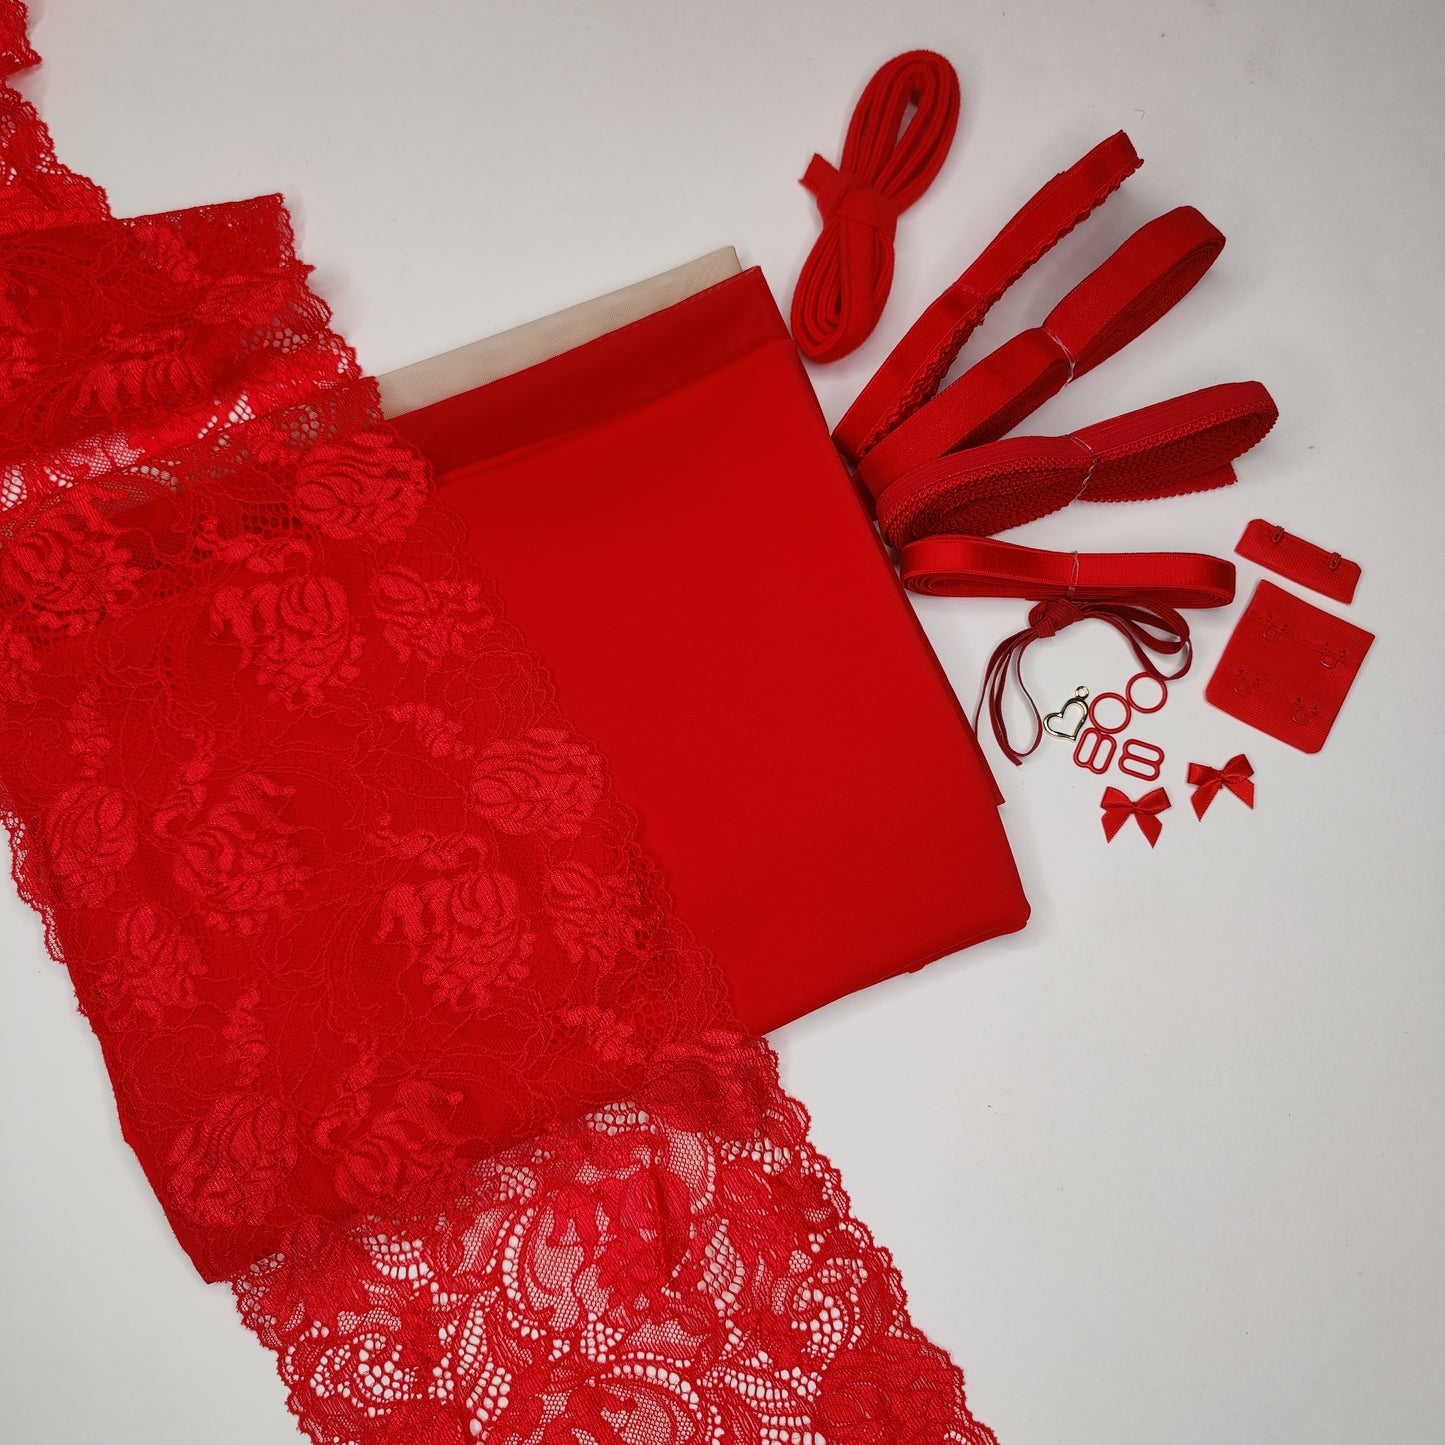 Bra + panties DIY sewing set / creative sewing package with <tc>lace</tc> and microfiber red IDnsx1